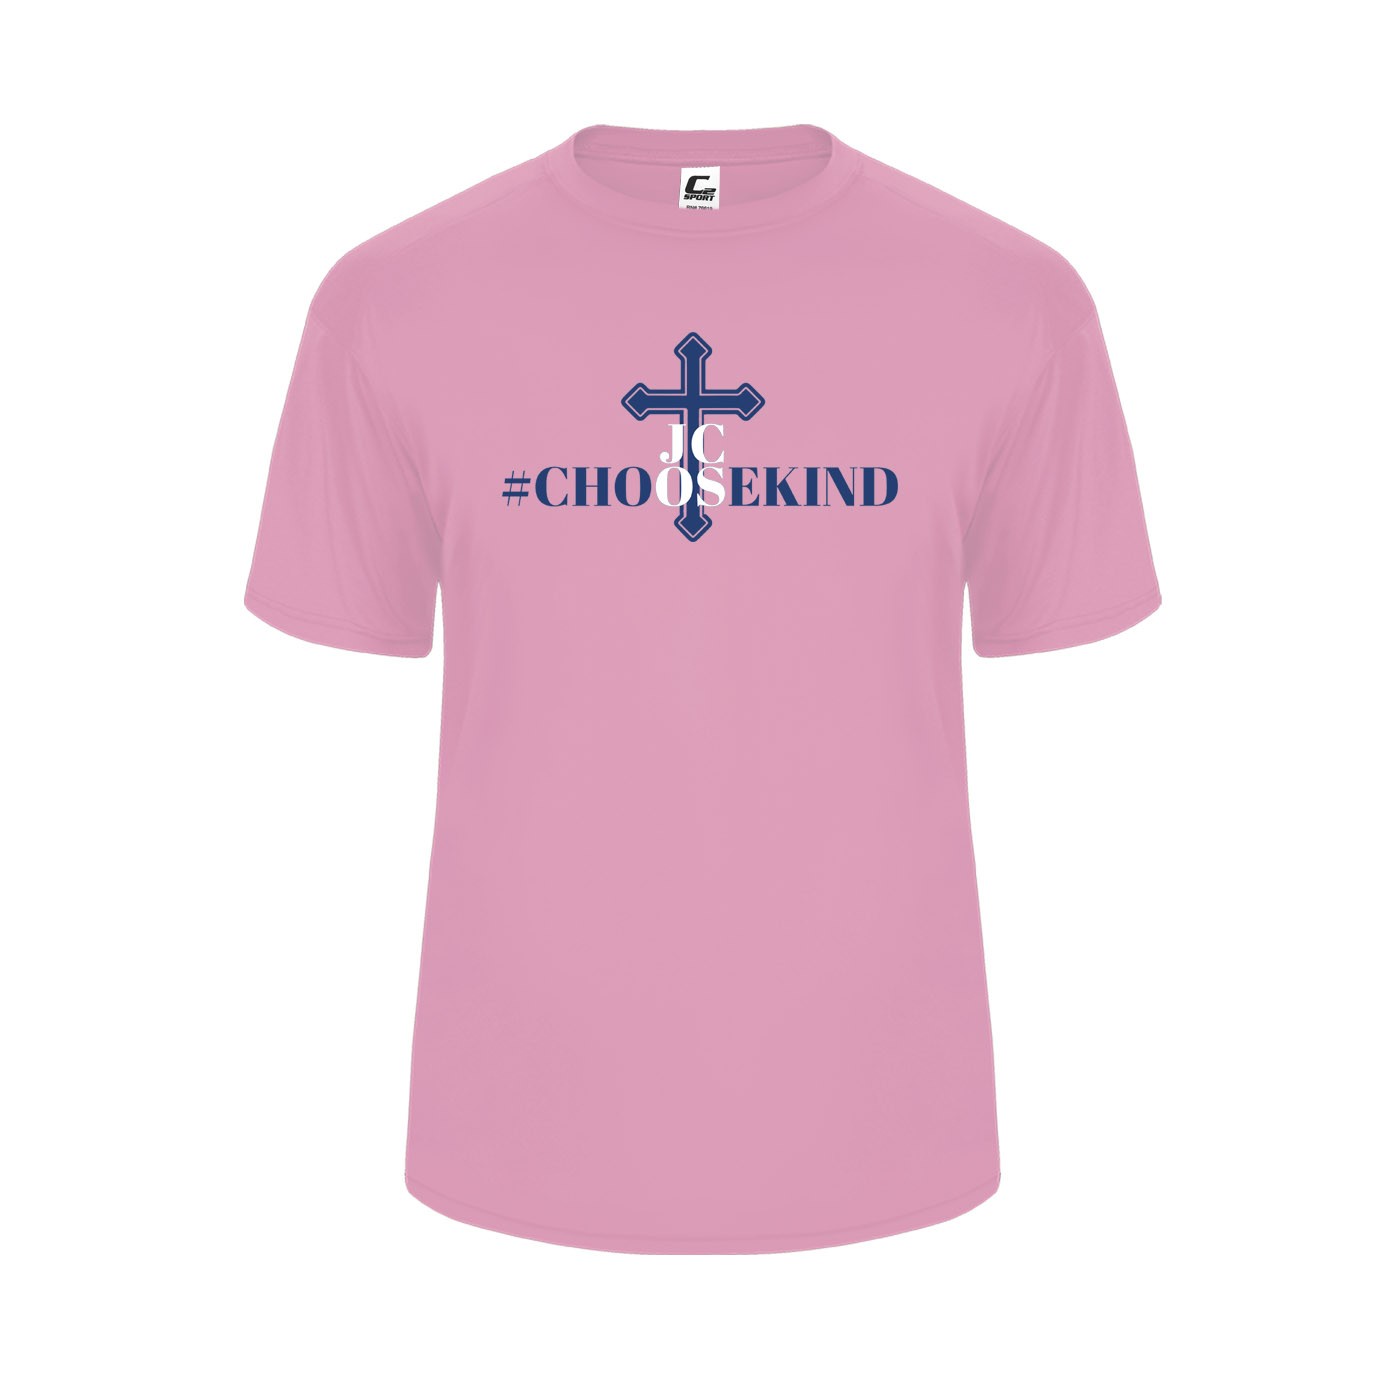 JCOS Spirit S/S Performance T-Shirt w/ Choose Kindness Logo - Please Allow 2-3 Weeks for Delivery